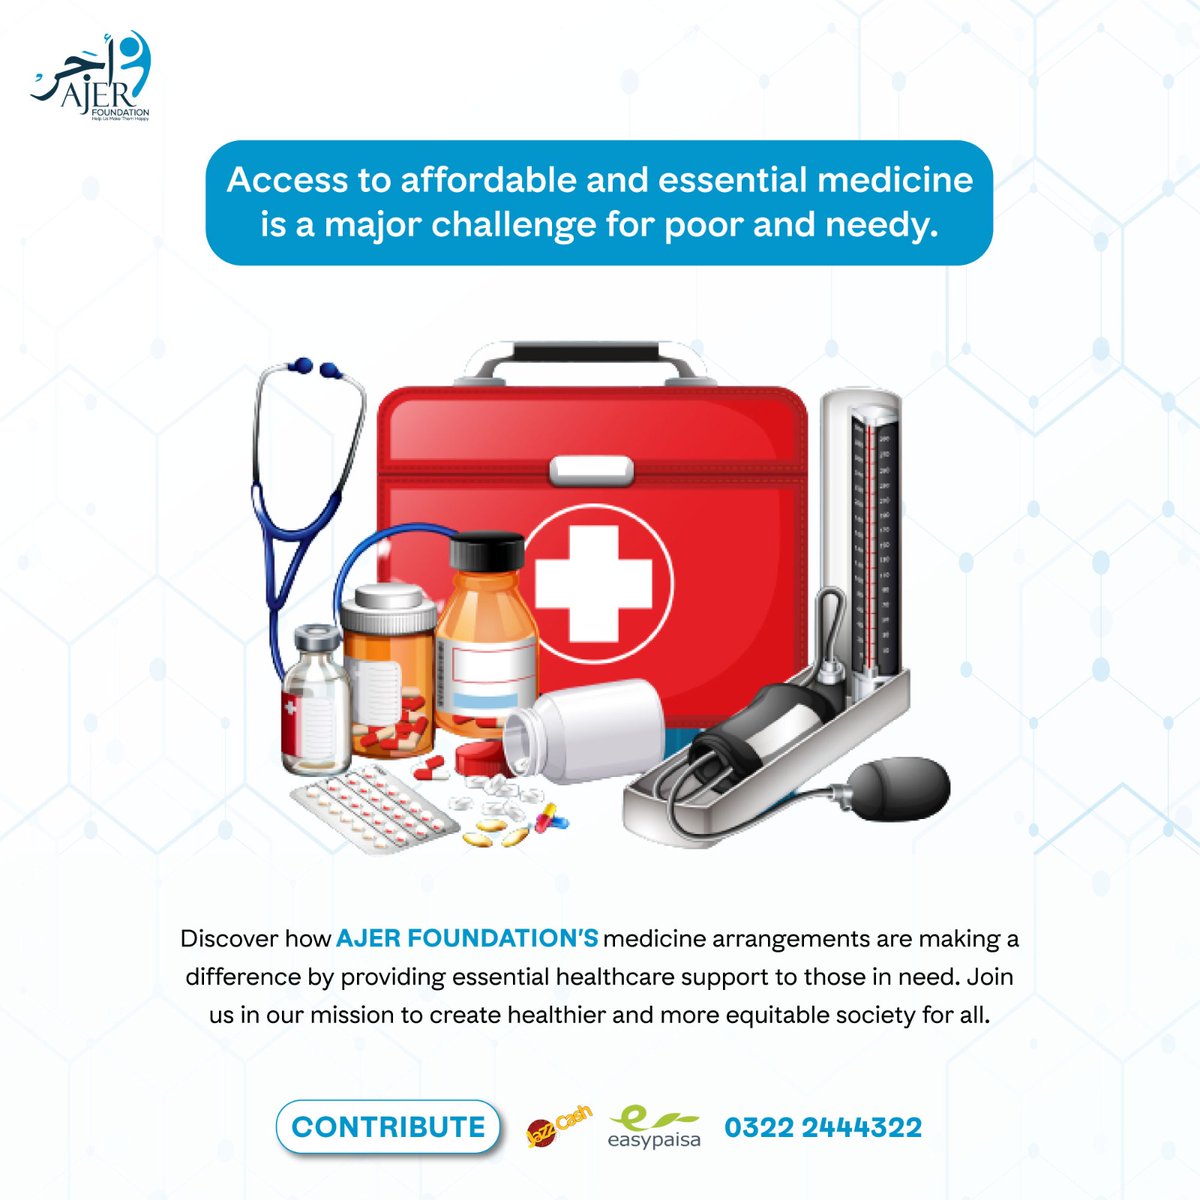 Ensuring Easy Access to Medicine & Essentials for the Needy
.
.
.
#CommunitySupport#HealthcareForAll #HelpingHands #AjerCares #SupportingTheNeedy #GivingBack #TogetherWeCan